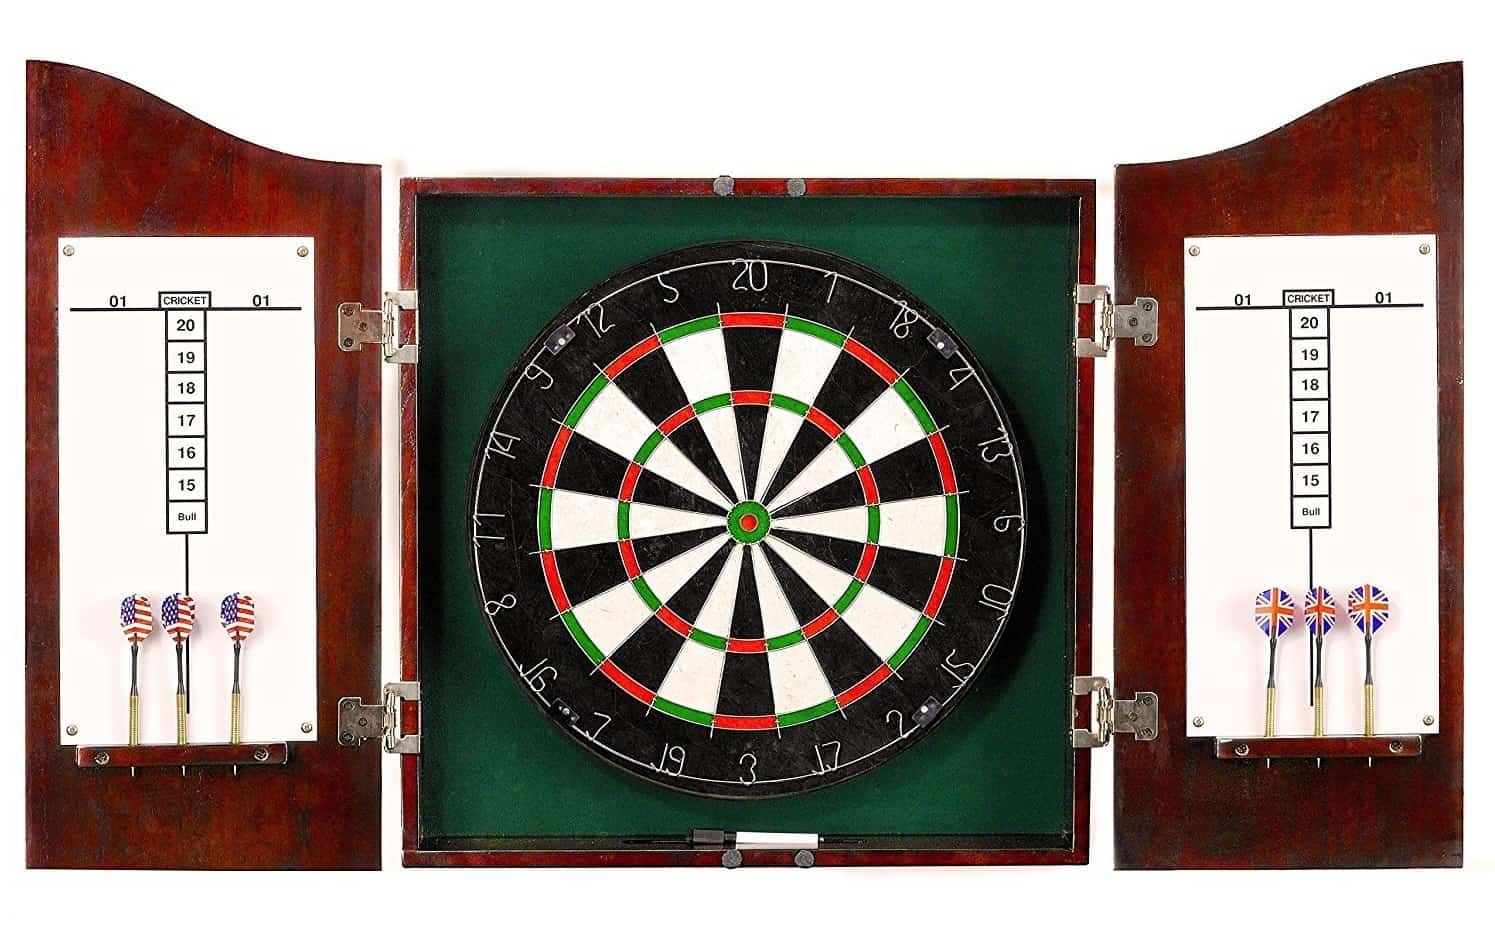 Hathaway Centerpoint Solid Wood Dartboard and Cabinet Set, Dark Cherry Finish